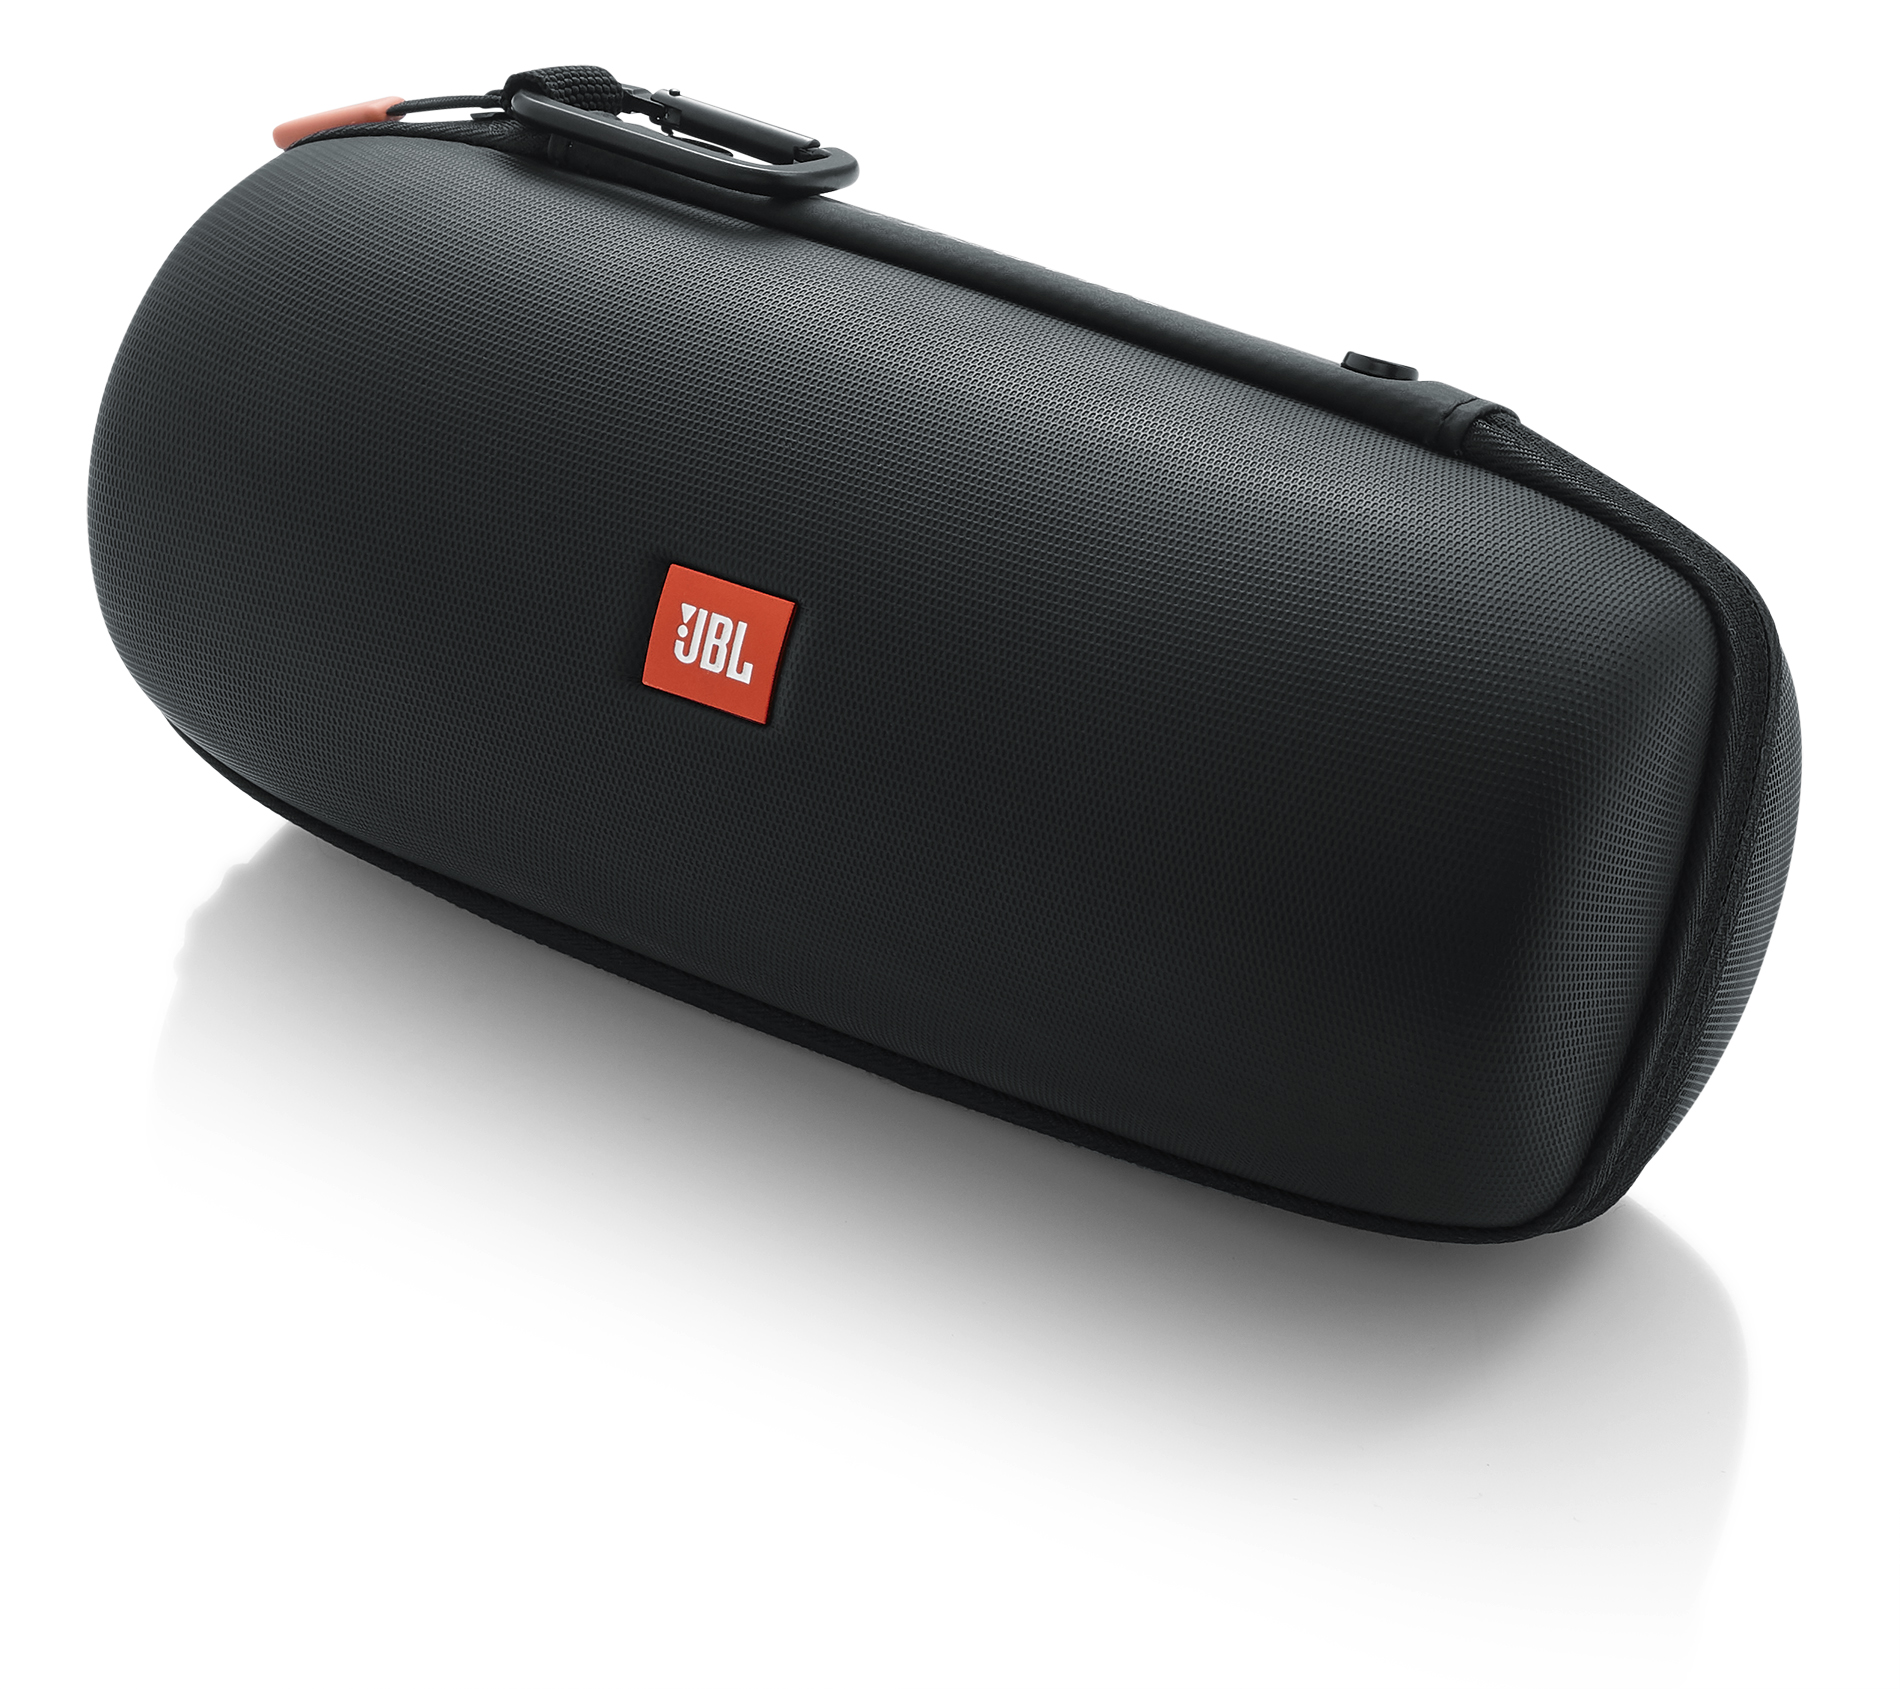 All Portable Speaker Products - JBL Bags